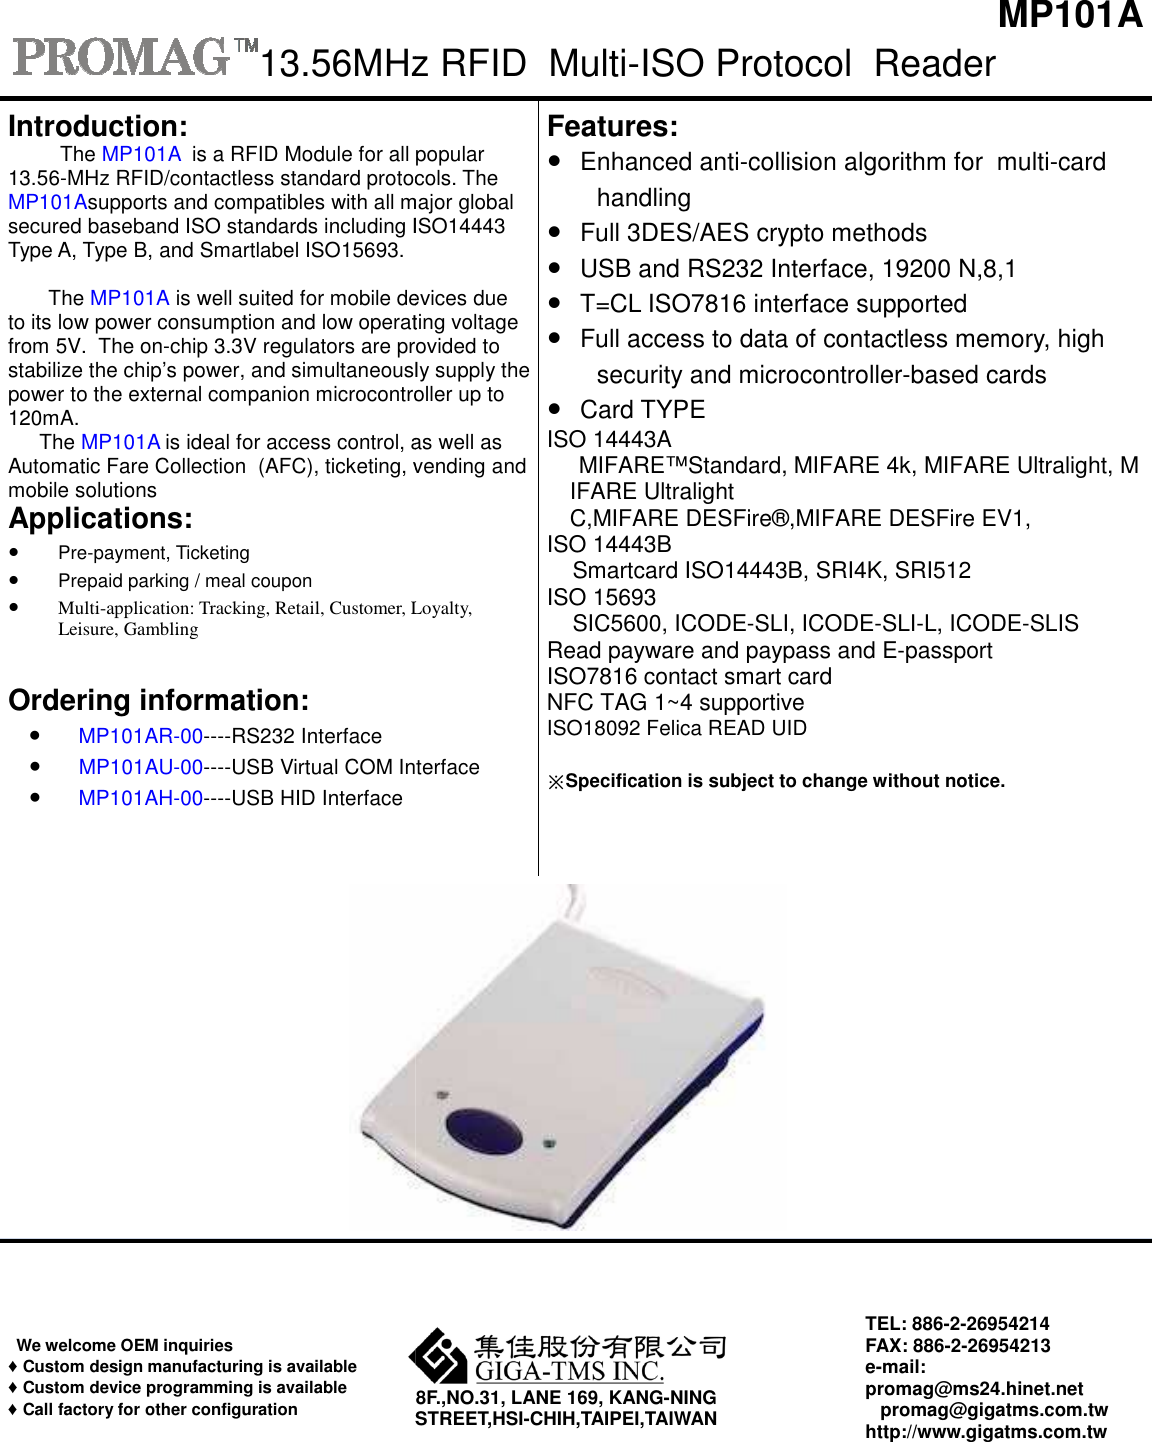 13.56MHzIntroduction:The MP101A  is a RFID Module for all popular13.56-MHz RFID/contactless standard protocols.MP101Asupports and compatibles with all majorsecured baseband ISO standards including ISO14443Type A, Type B, and Smartlabel ISO15693.   The MP101A is well suited for mobile devicesto its low power consumption and low operatingfrom 5V.  The on-chip 3.3V regulators are providedstabilize the chip’s power, and simultaneouslypower to the external companion microcontroller120mA. The MP101A is ideal for access control, asAutomatic Fare Collection  (AFC), ticketing, vendingmobile solutions Applications:●Pre-payment, Ticketing●Prepaid parking / meal coupon●Multi-application: Tracking, Retail, Customer, Loyalty,Leisure, GamblingOrdering information:●MP101AR-00----RS232 Interface●MP101AU-00----USB Virtual COM Interface●MP101AH-00----USB HID InterfaceWe welcome OEM inquiries ♦Custom design manufacturing is available♦Custom device programming is available♦Call factory for other configurationSTREET,HSI13.56MHz RFID  Multi-ISO Protocol  Readerpopular protocols. The major global ISO14443  devices due operating voltage provided to simultaneously supply the microcontroller up to as well as vending and Loyalty,InterfaceFeatures: ●Enhanced anti-collision algorithmhandling ●Full 3DES/AES crypto methods●USB and RS232 Interface, 19200●T=CL ISO7816 interface supported●Full access to data of contactlesecurity and microcontroller●Card TYPEISO 14443A MIFARE™Standard, MIFARE 4k,IFARE Ultralight C,MIFARE DESFire®,MIFARE DESFireISO 14443B     Smartcard ISO14443B, SRI4K, ISO 15693  SIC5600, ICODE-SLI, ICODE-SLIRead payware and paypass and EISO7816 contact smart card NFC TAG 1~4 supportive  ISO18092 Felica READ UID ※Specification is subject to change without8F.,NO.31, LANE 169, KANG-NING STREET,HSI-CHIH,TAIPEI,TAIWAN TEL:FAX:e-mail:promag@ms24.hinet.net    promag@gigatms.com.twhttp://www.gigatms.com.twMP101A Reader algorithm for  multi-card methods19200 N,8,1 supportedcontactless memory, high microcontroller-based cards 4k, MIFARE Ultralight, MDESFire EV1,  SRI512 SLI-L, ICODE-SLIS E-passport without notice. TEL: 886-2-26954214 FAX: 886-2-26954213 mail: promag@ms24.hinet.net promag@gigatms.com.tw http://www.gigatms.com.tw 